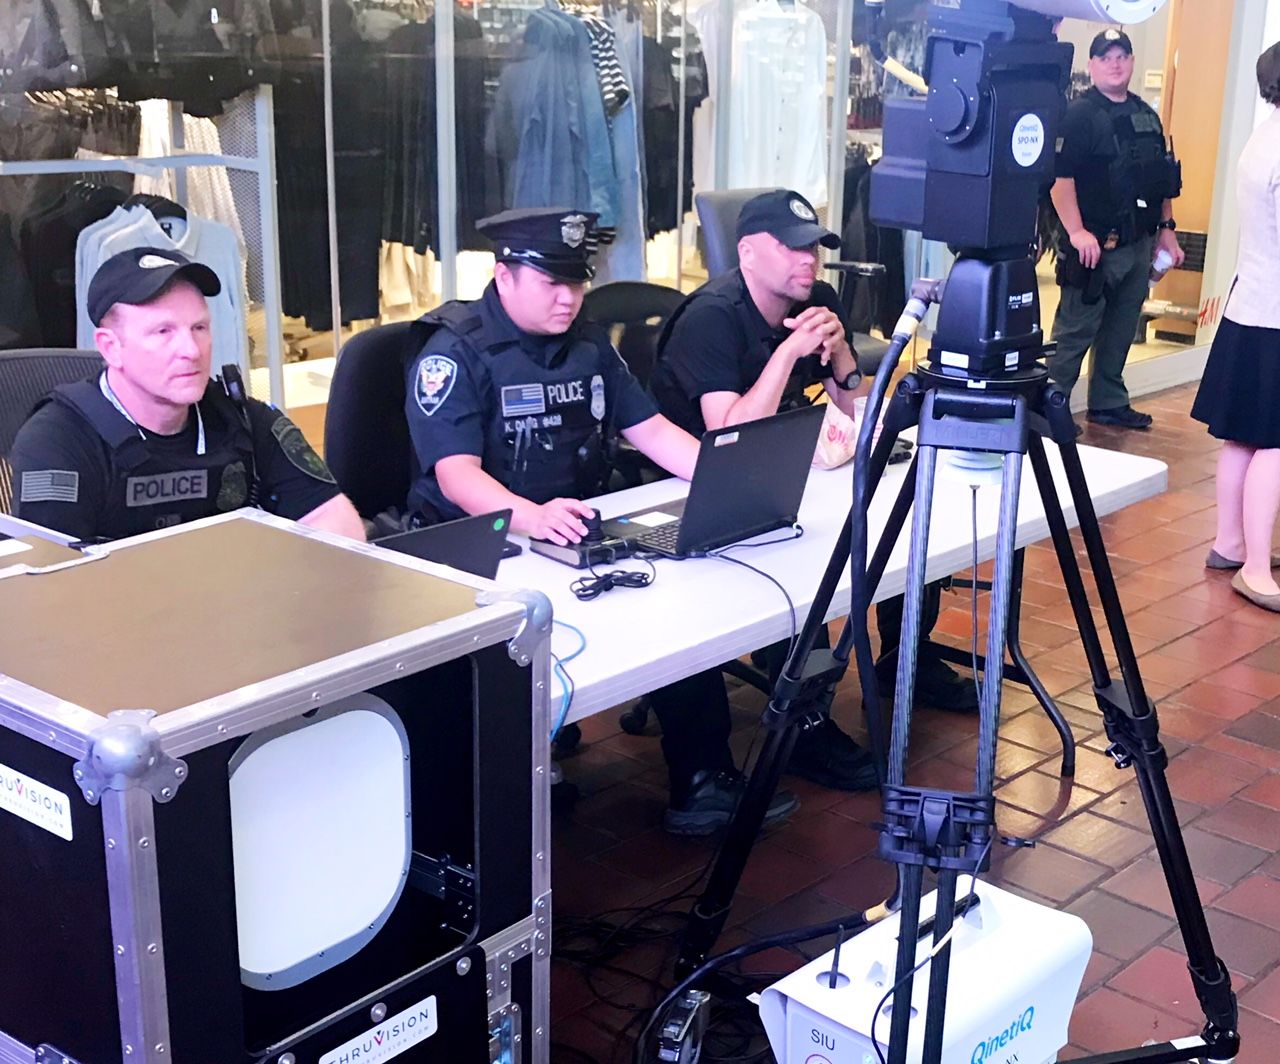 Amtrak police officers viewing laptop computers watched as passengers — including some decoys — walked through a first-floor hallway at Union Station Wednesday. (WTOP/Neal Augenstein)